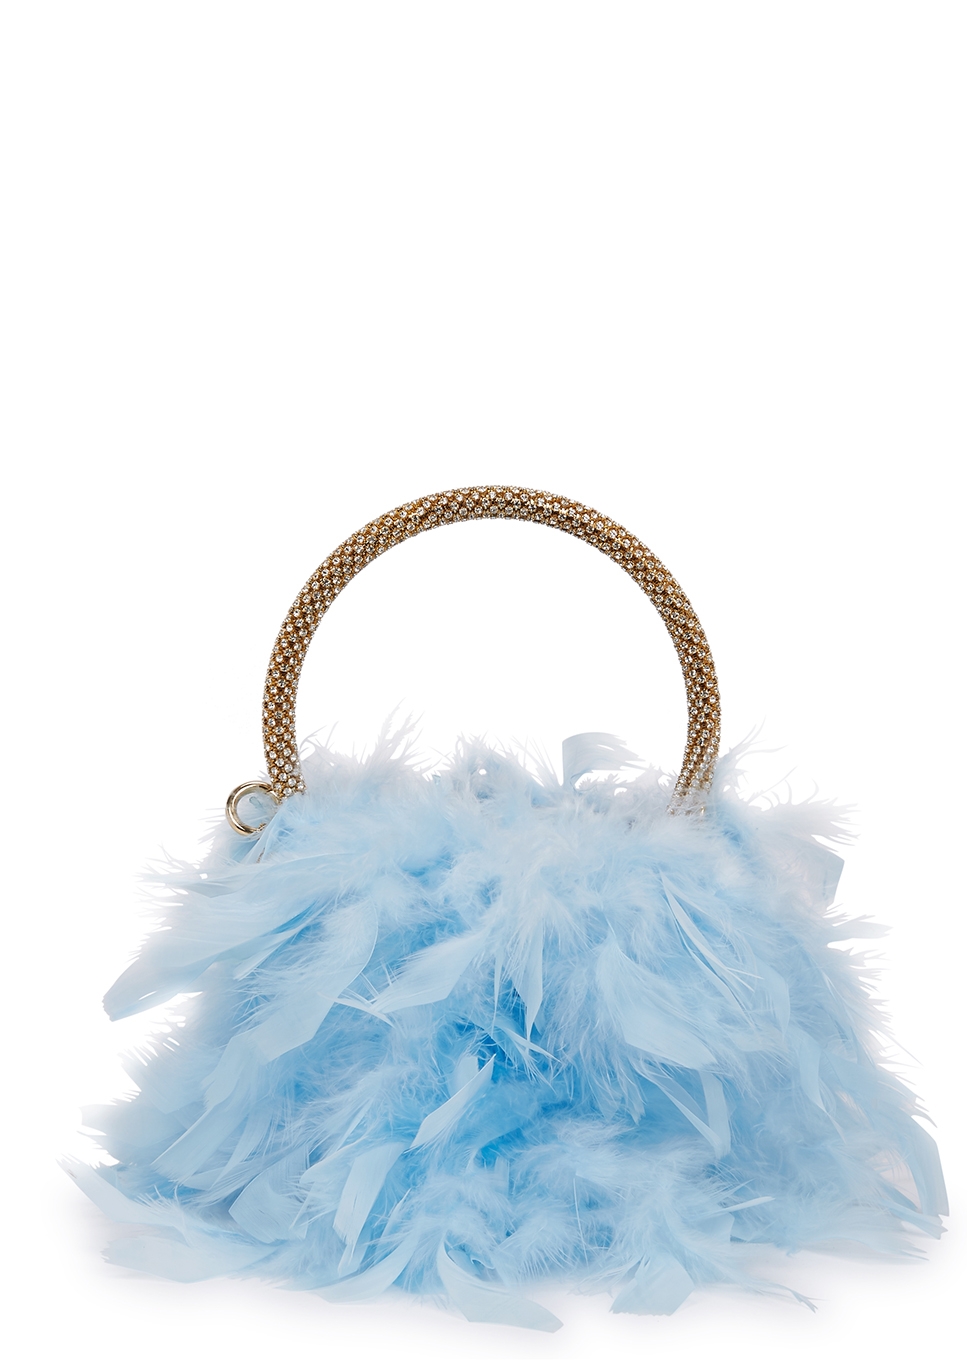 Twiggy blue feathered top handle bag